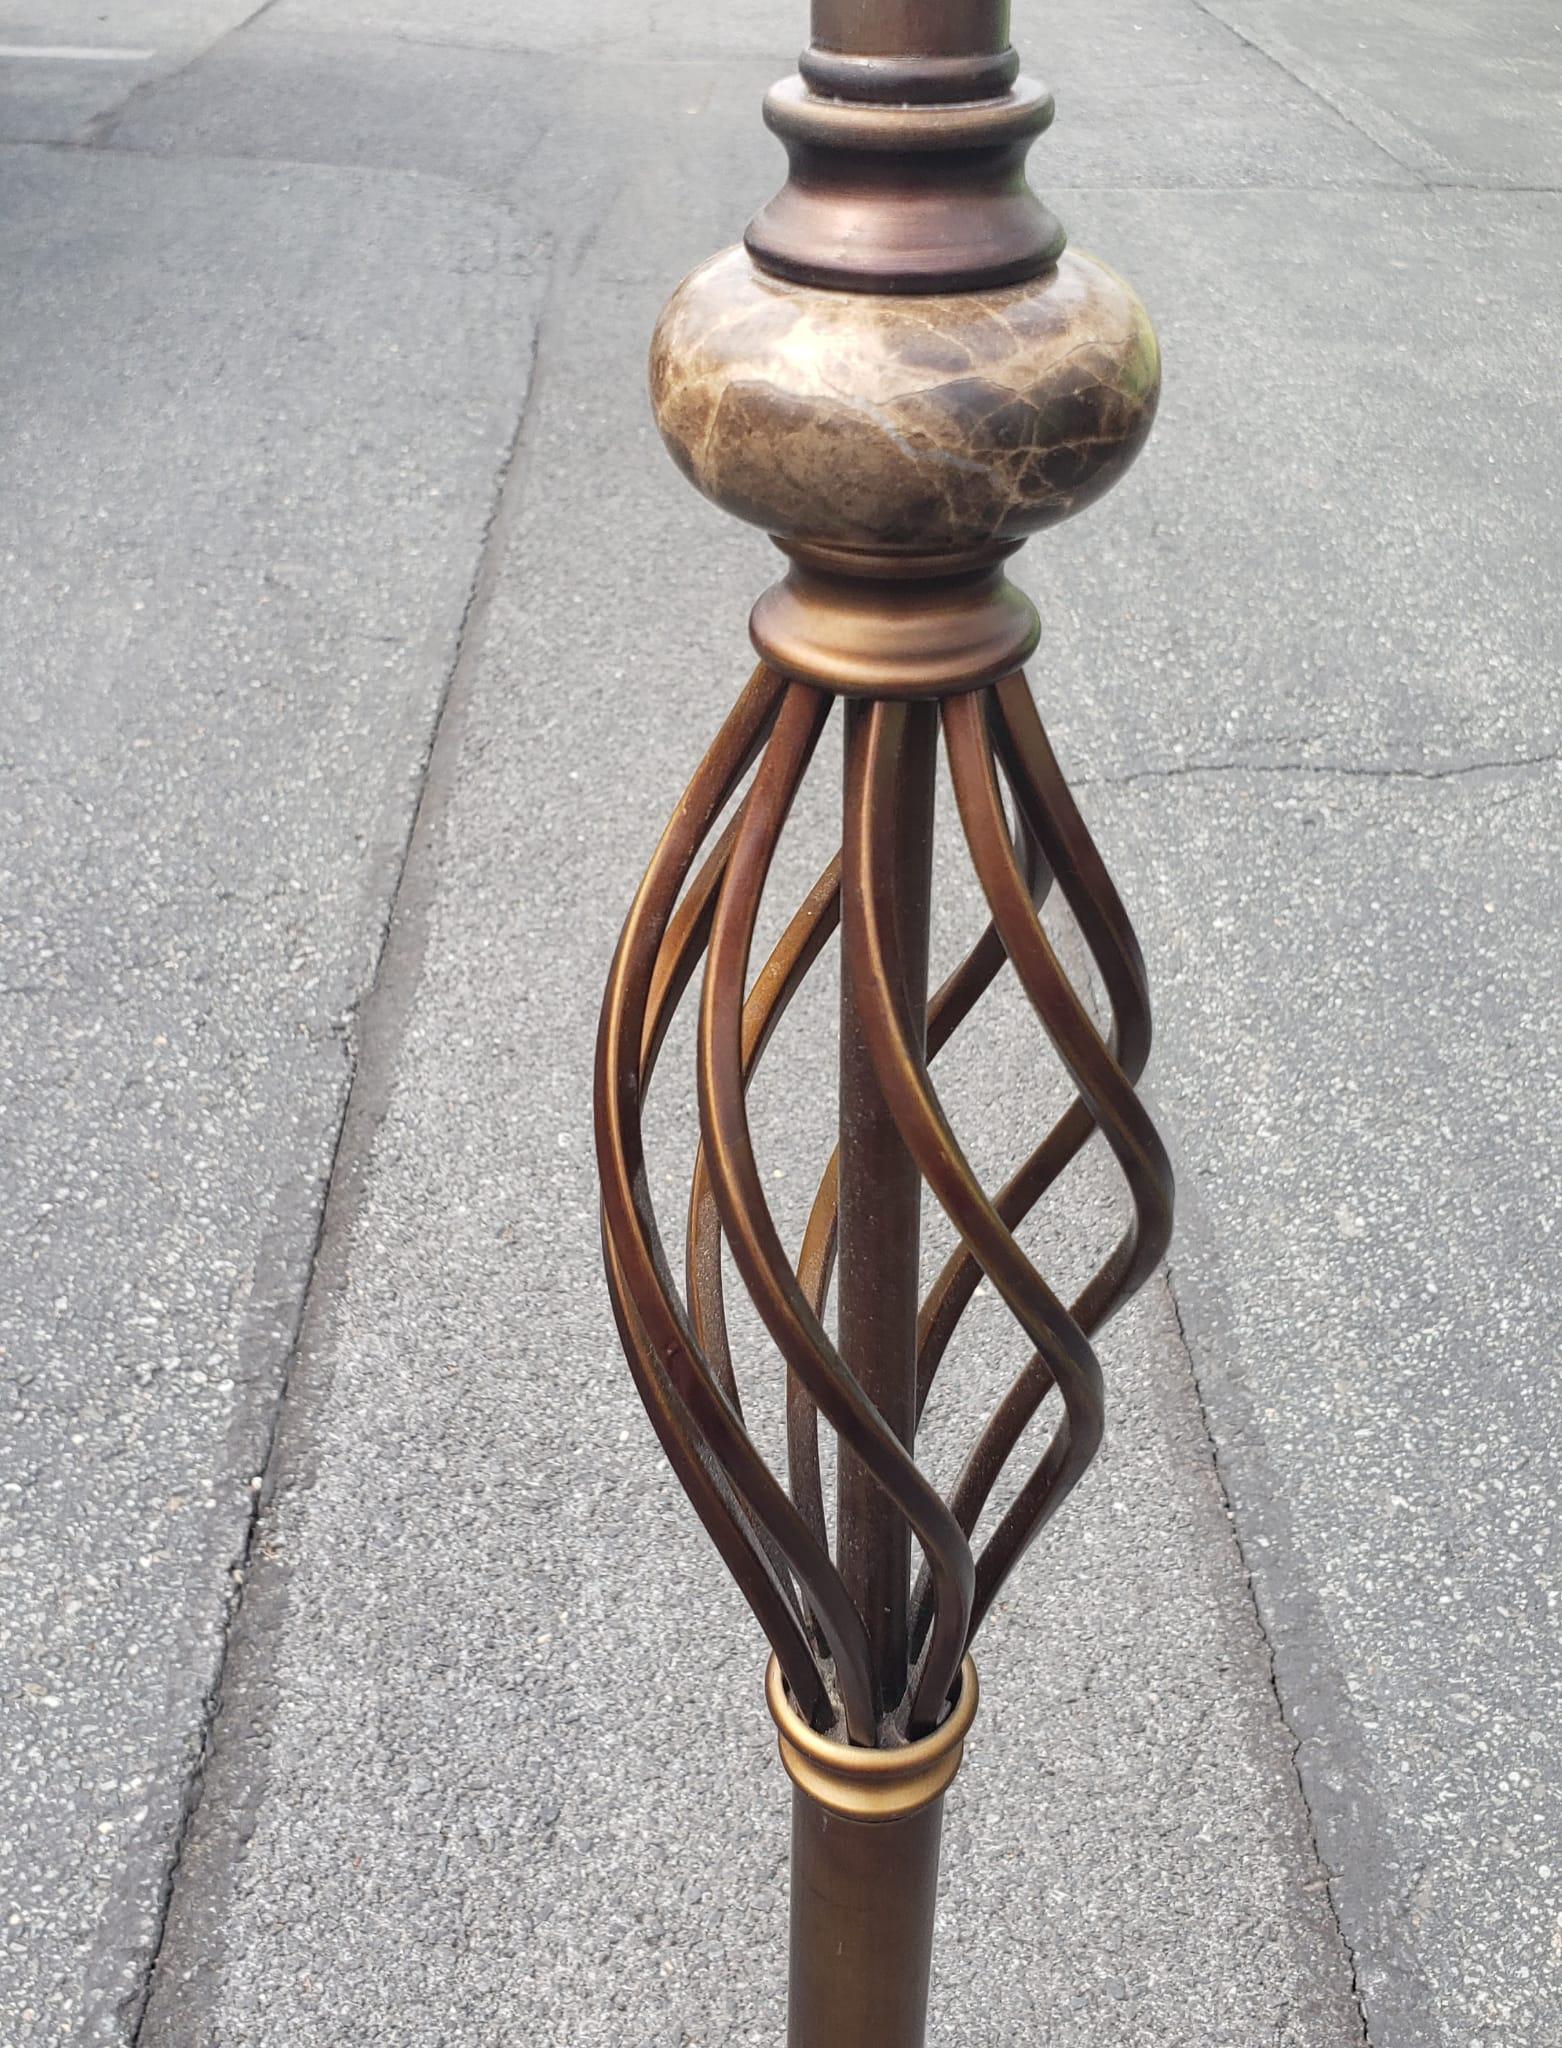 30th Century patinated Copper finish floor lamp in very good vintage condition. Measures 9.5